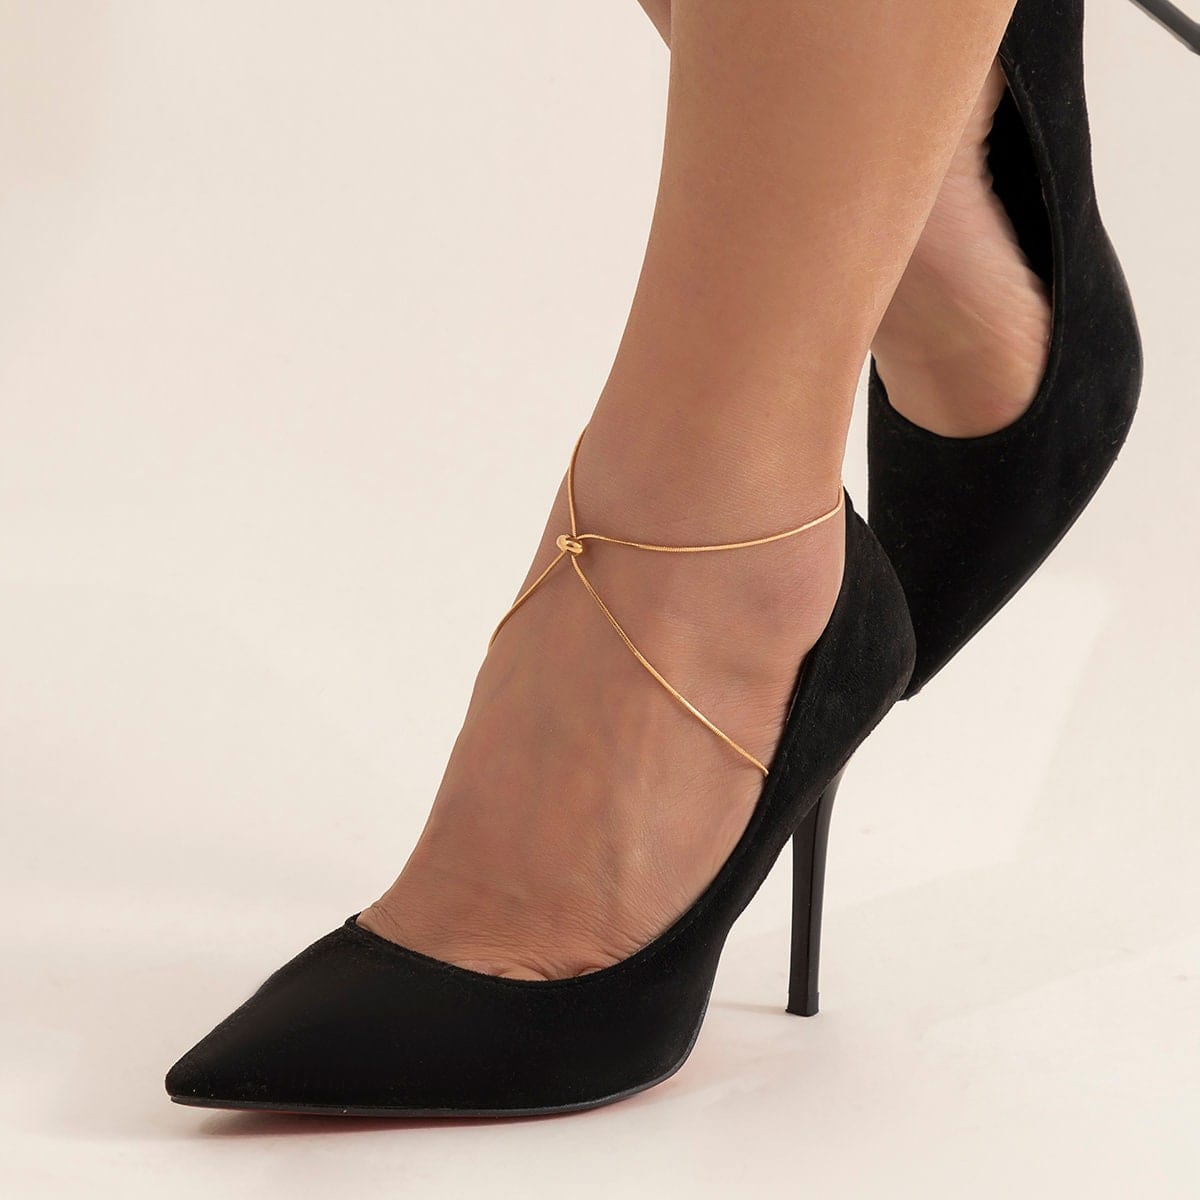 Dainty Adjustable Barefoot Sandal Foot Chain Anklet